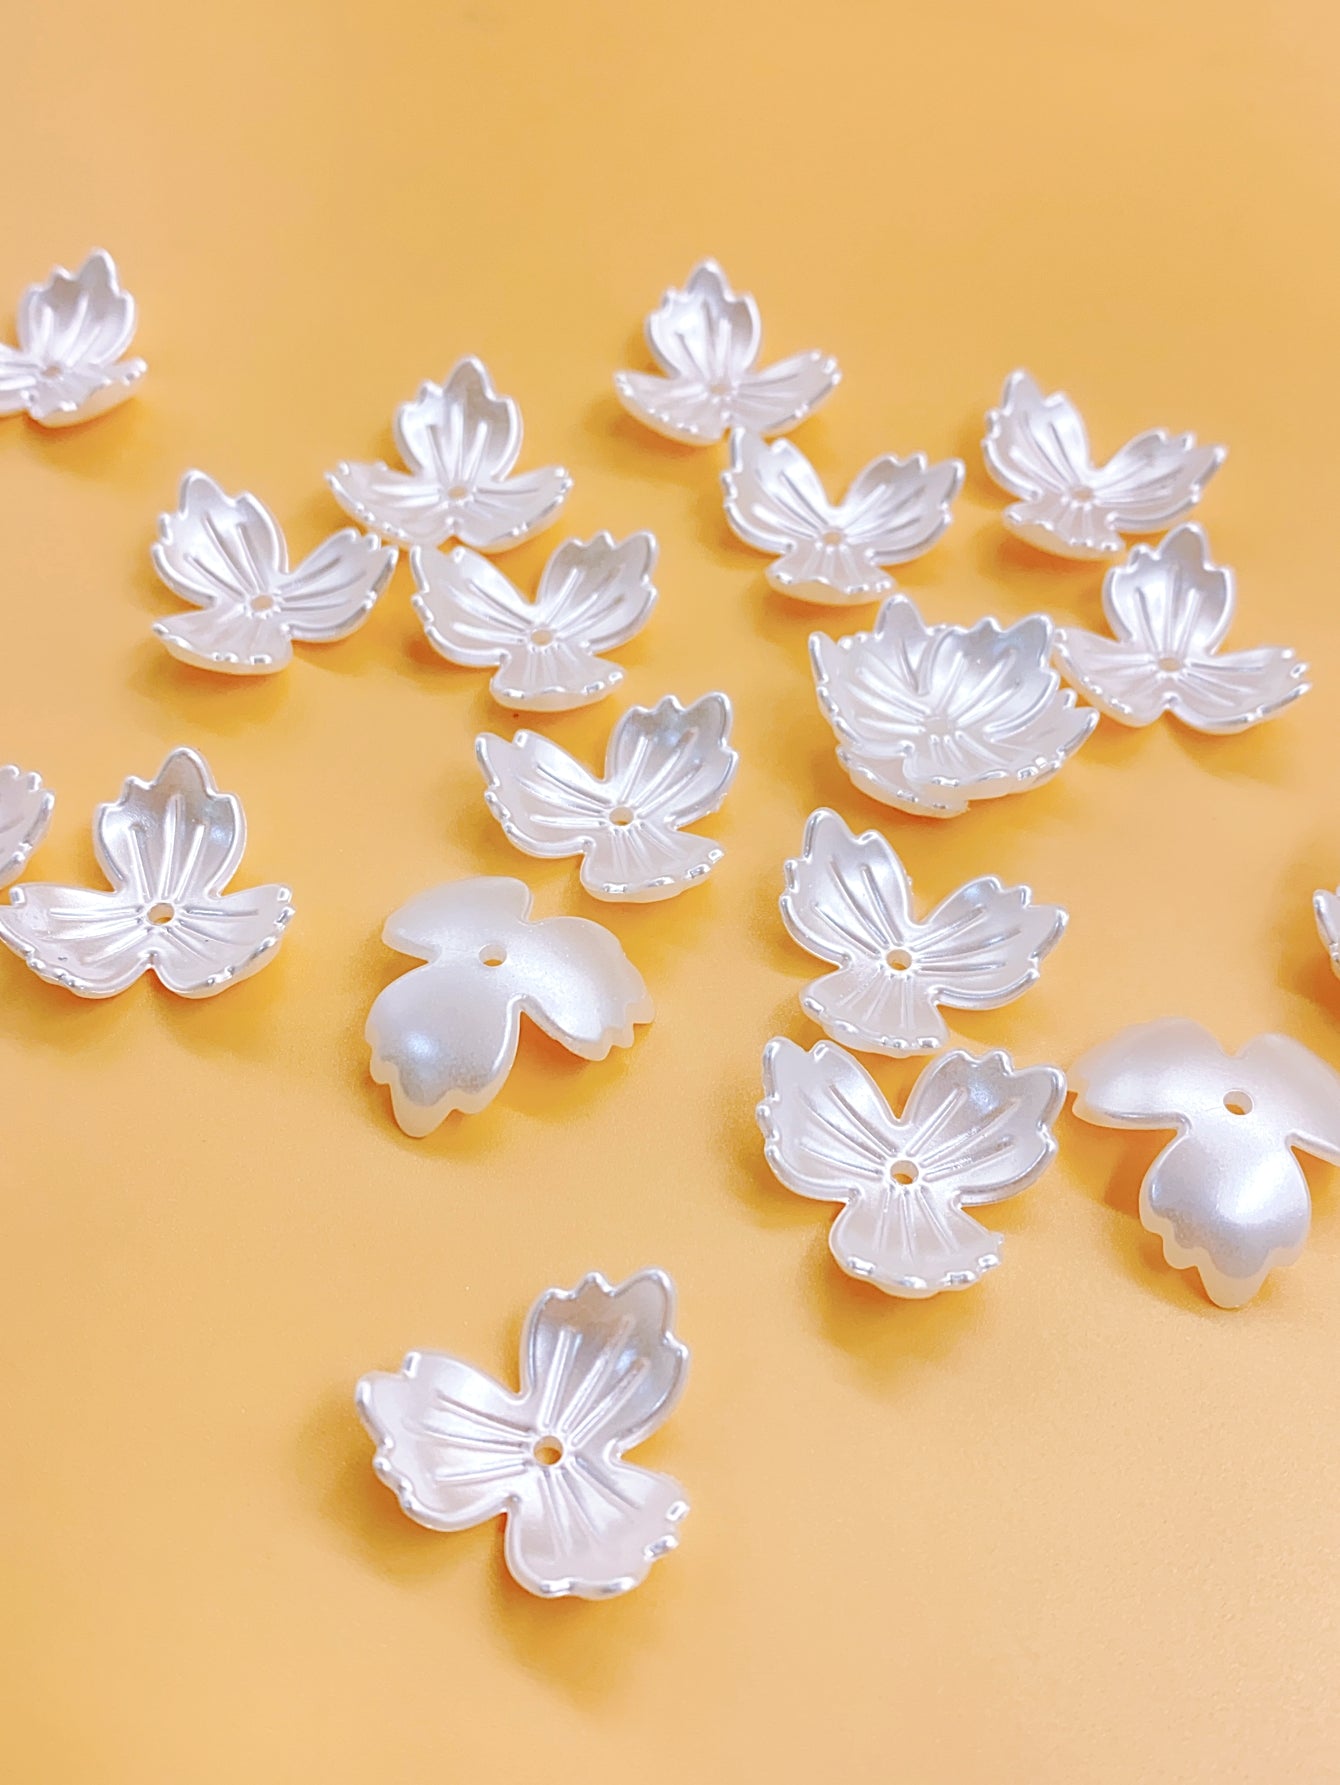 New abs imitation pearl straight hole three-leaf flower diy flower bouquet sent to girlfriend petal pearl material accessories